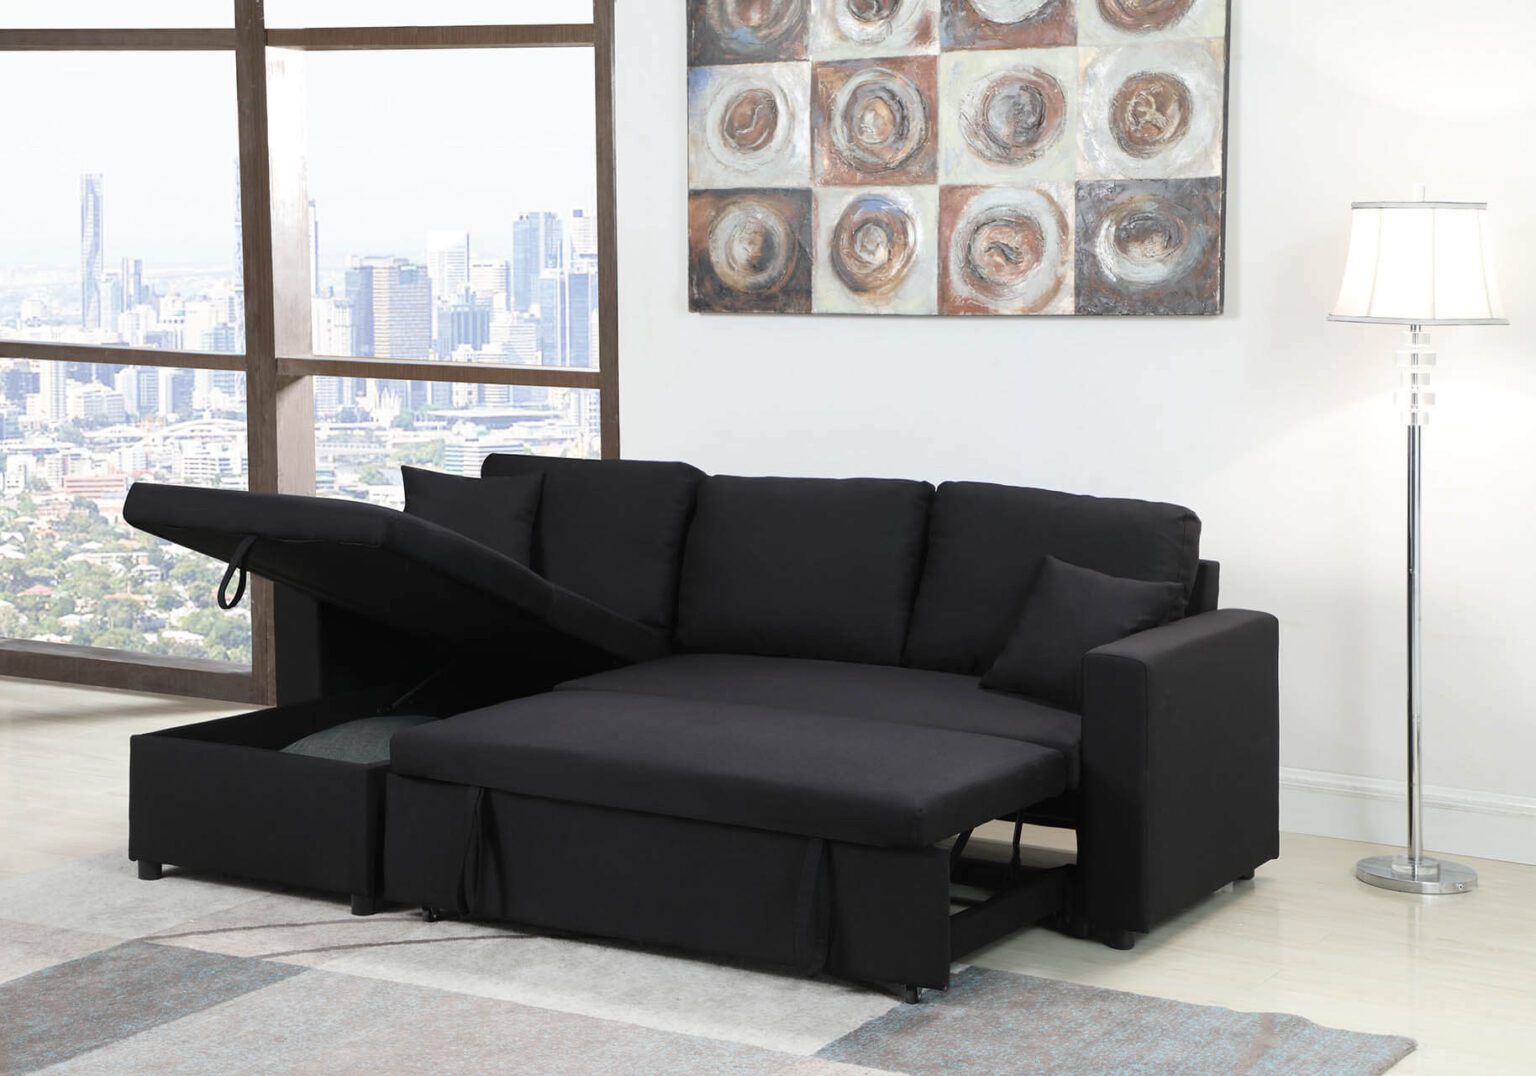 ❇️ L Sectional Couch 🛋️ Brand New In Box With Pull Out Bed And Storage 